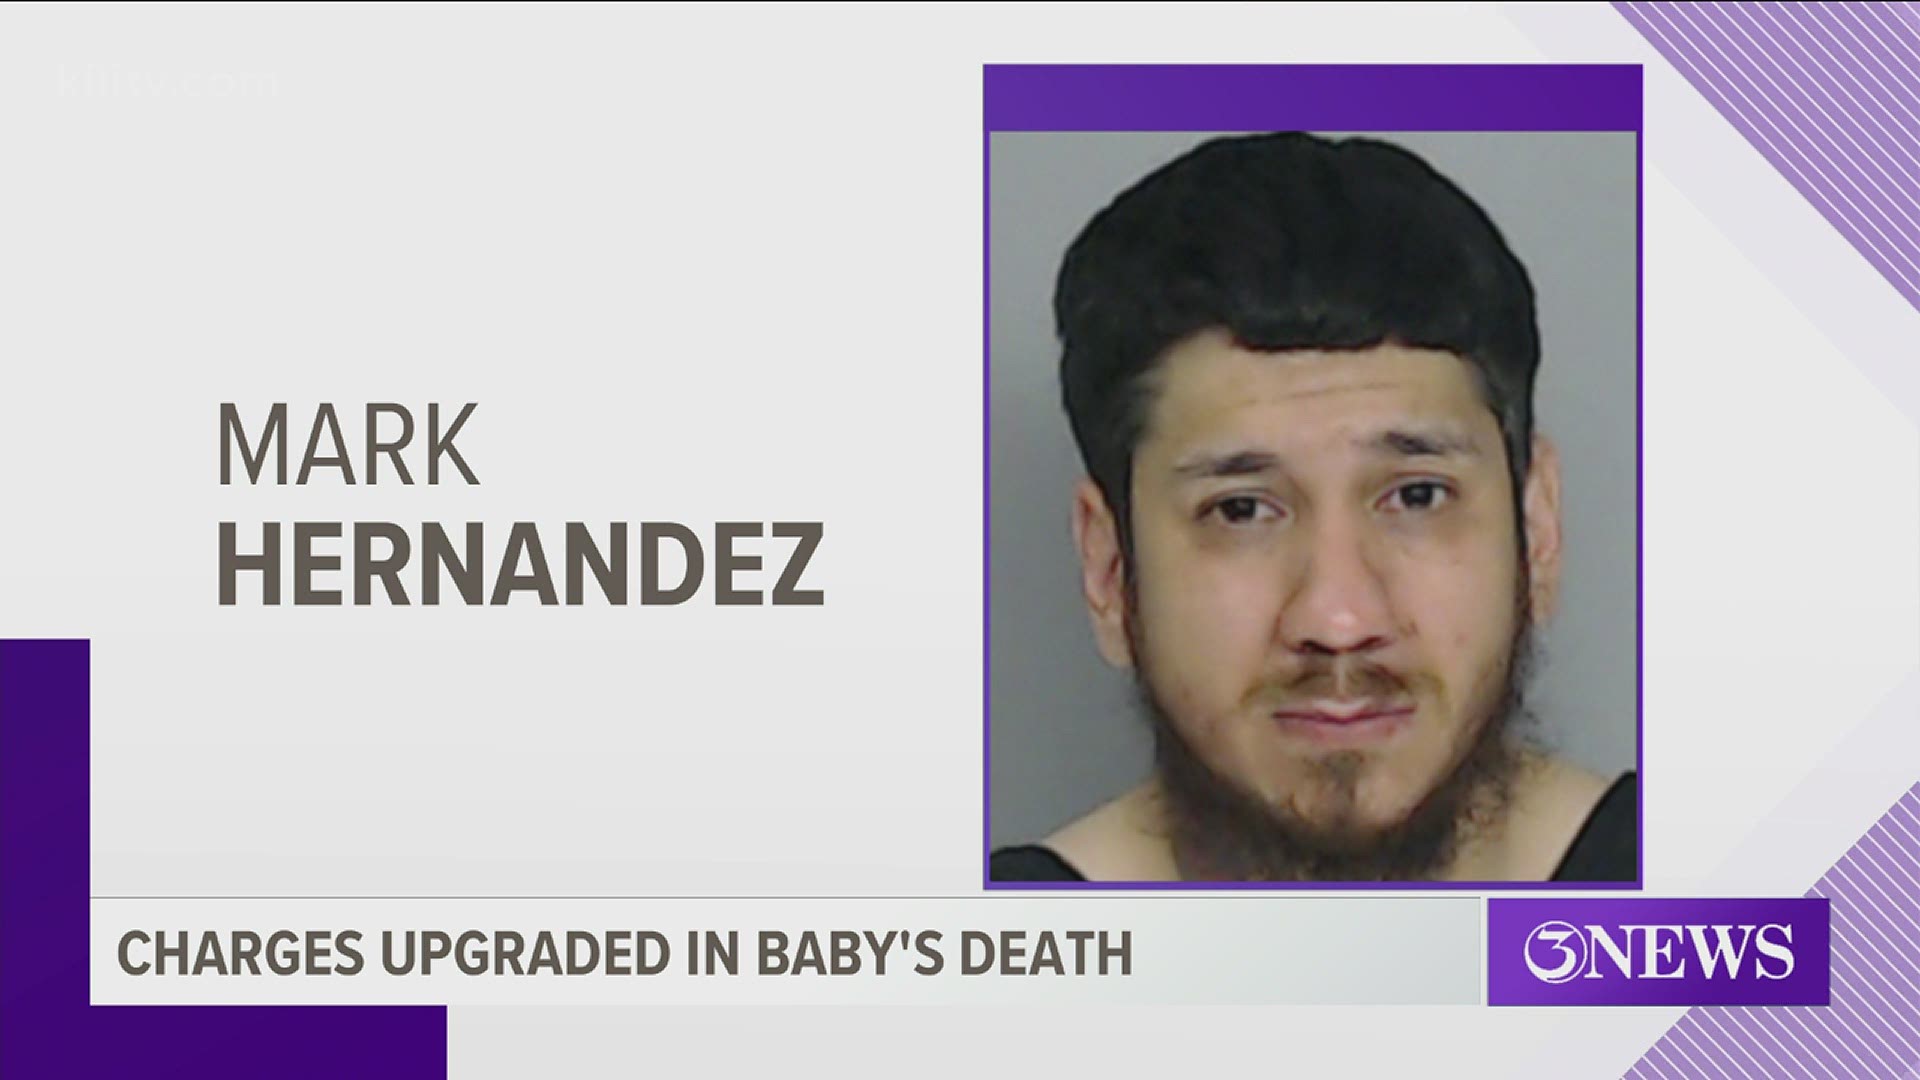 31-year-old Mark Hernandez was arrested earlier this week on injury to a child charges after a 1-year-old baby girl was found unresponsive in his care.